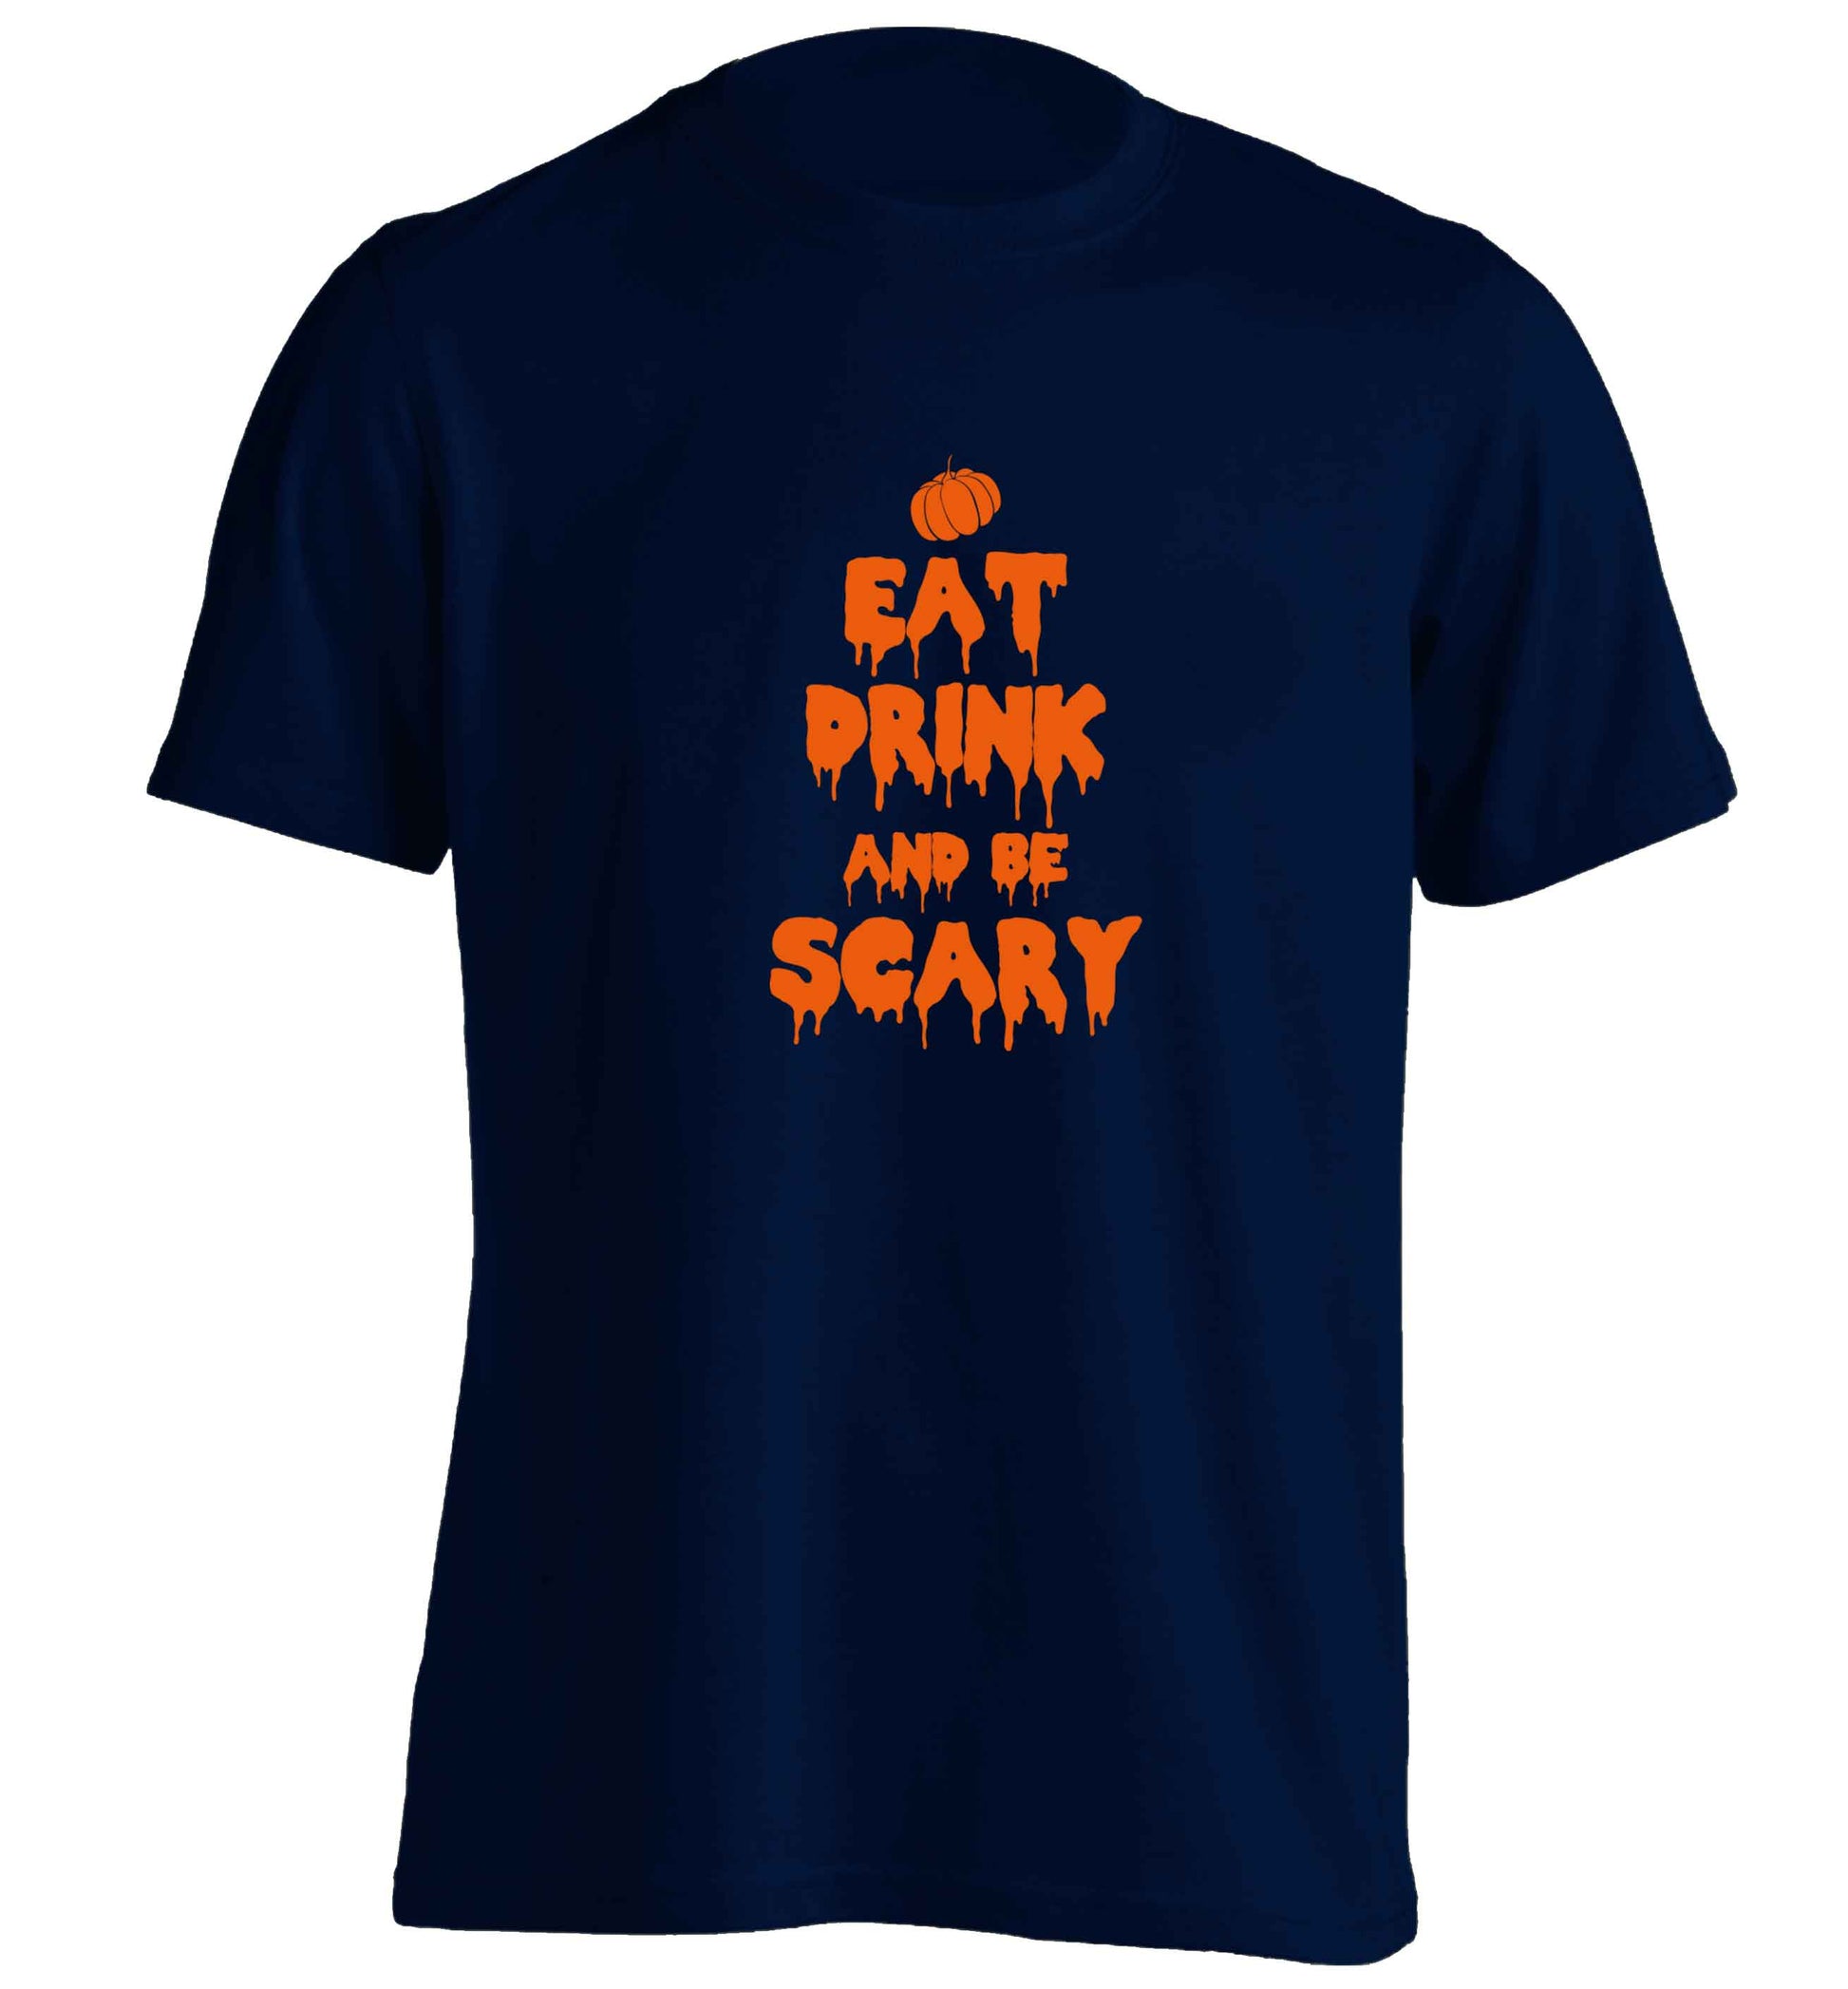 Eat drink and be scary adults unisex navy Tshirt 2XL